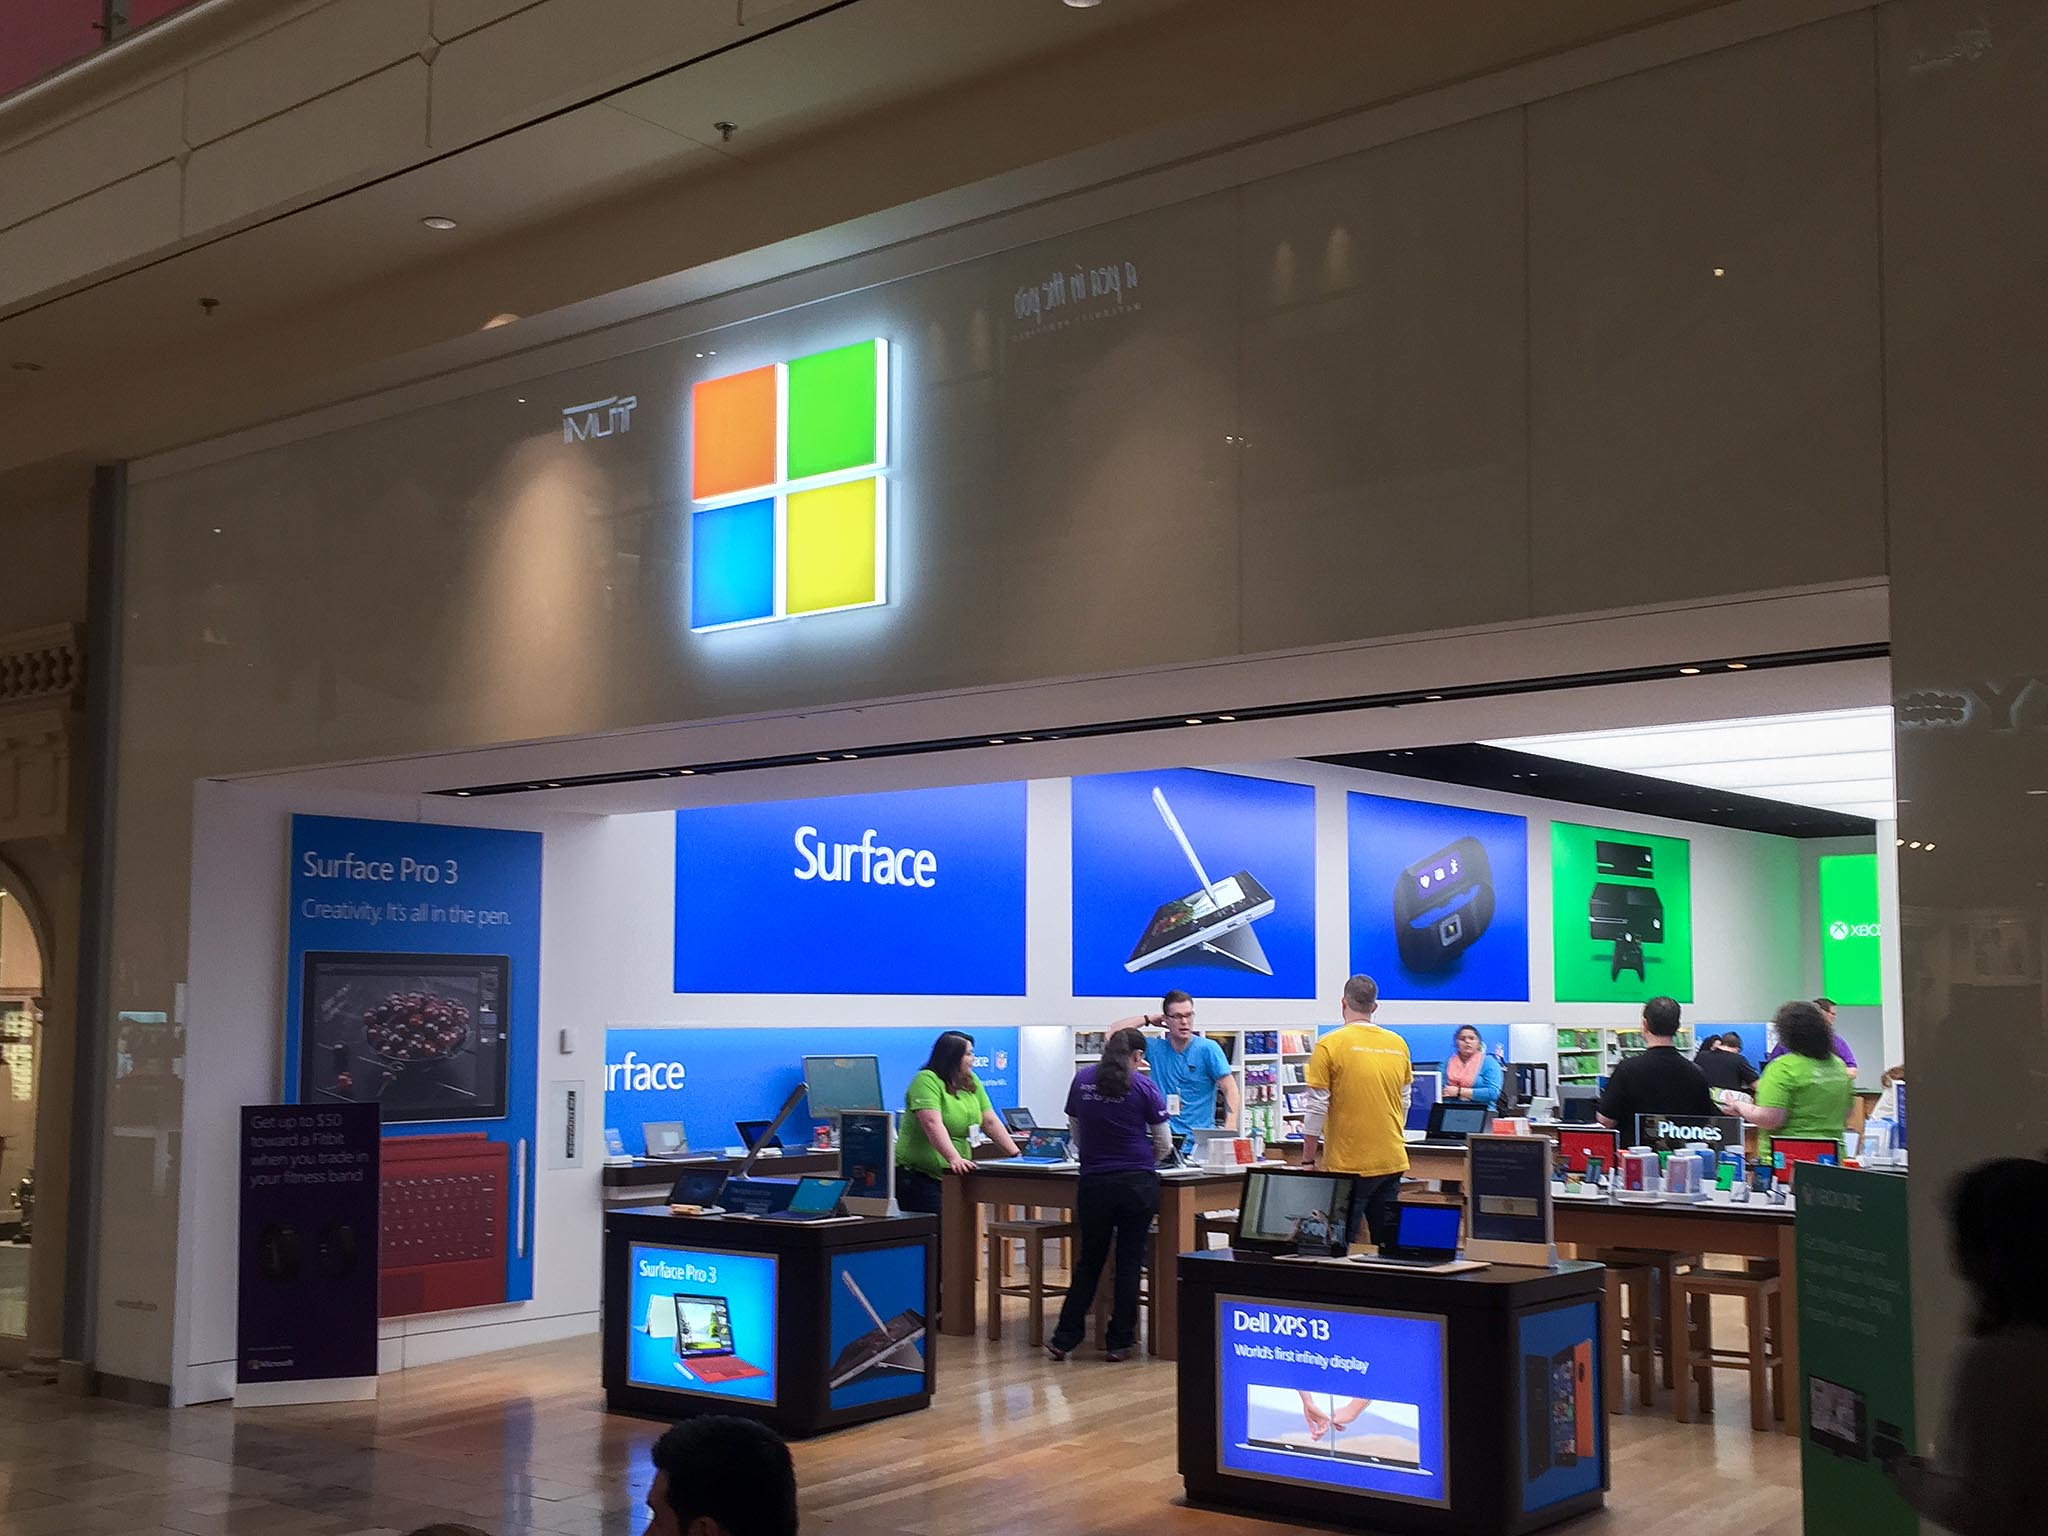 How to get to Microsoft Store Westfield Valley Fair in Santa Clara